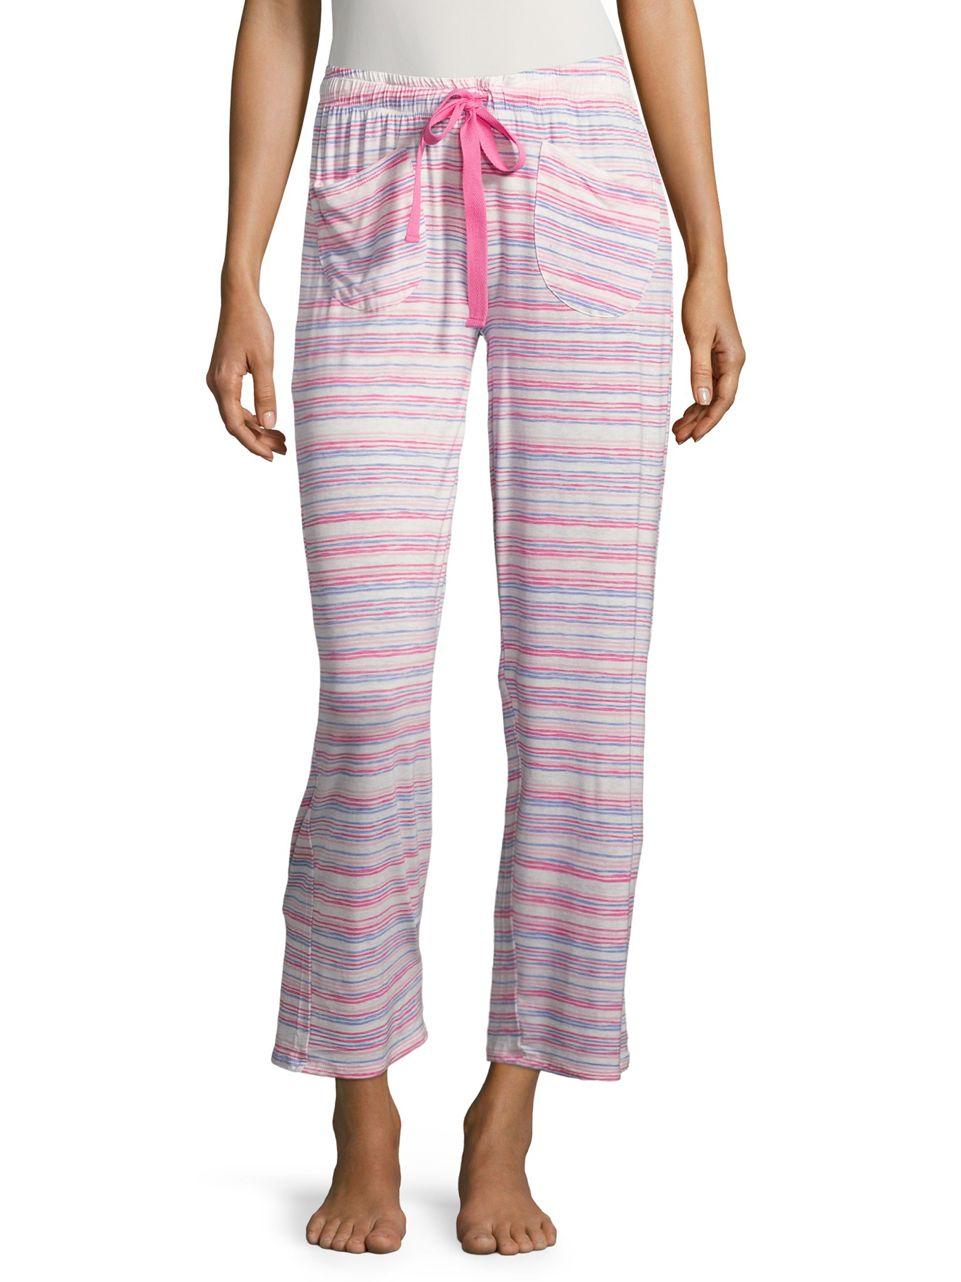 Lyst - Roudelain Striped Pajama Pants in White